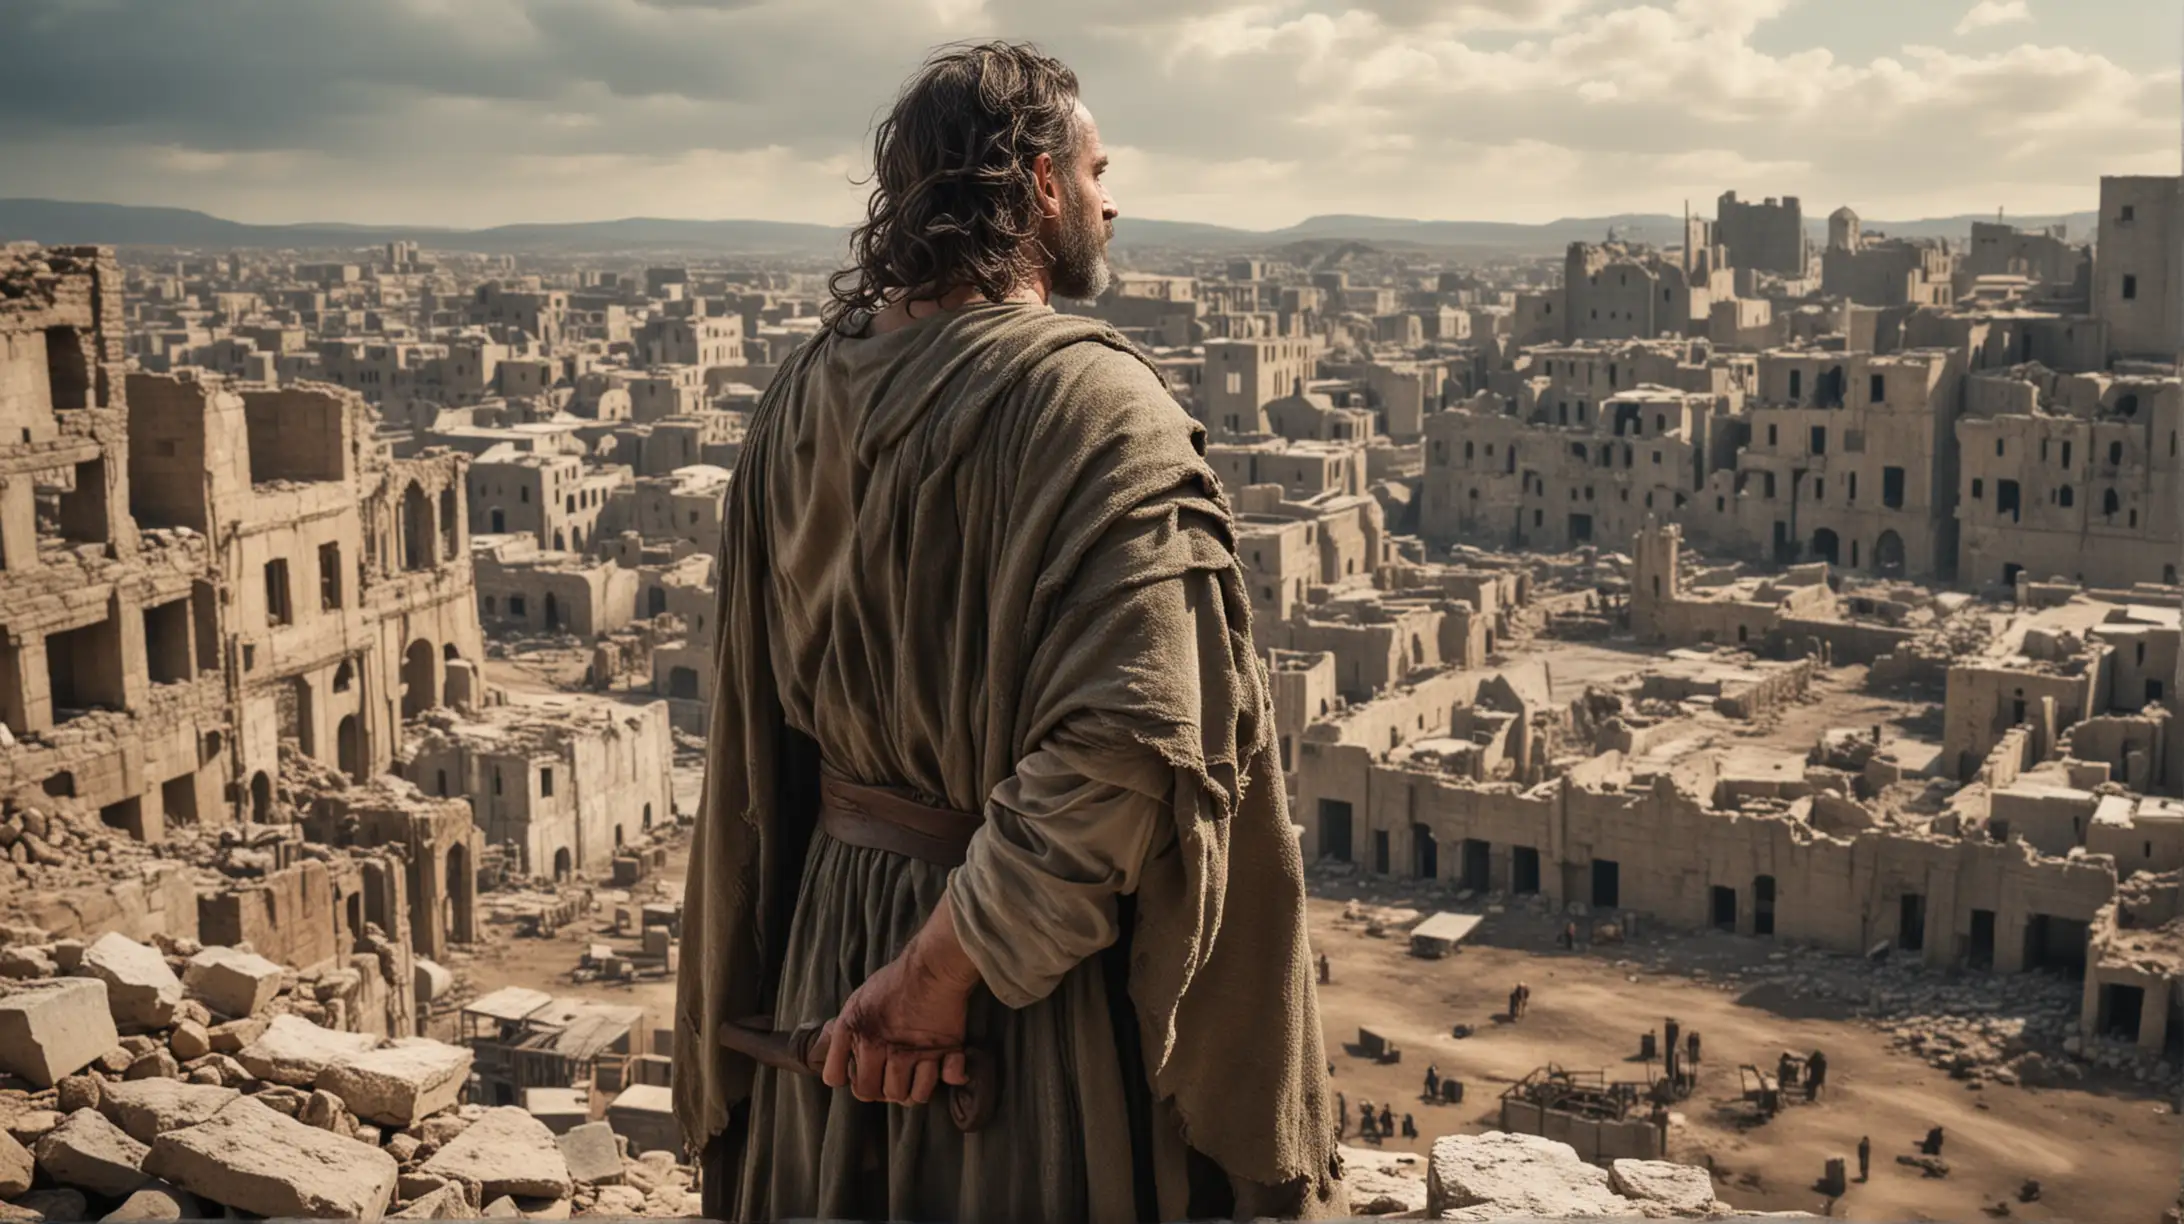 A close up view of a middle aged Biblical Nehemiah standing beside a desolate city, with broken walls, and ruined  buildings. Set during the Biblical era.